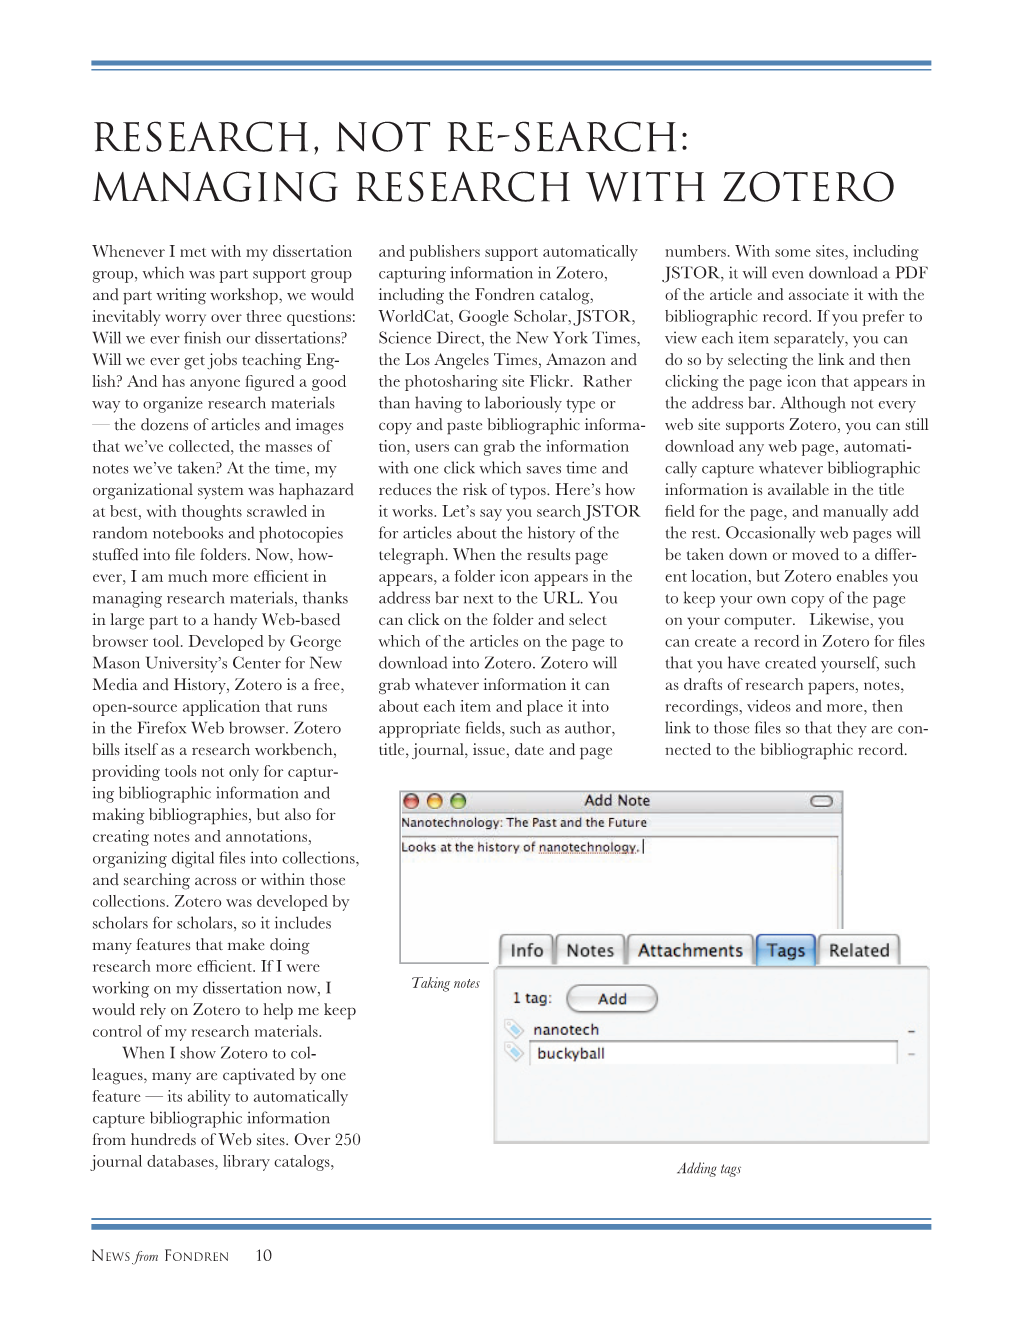 Managing Research with Zotero